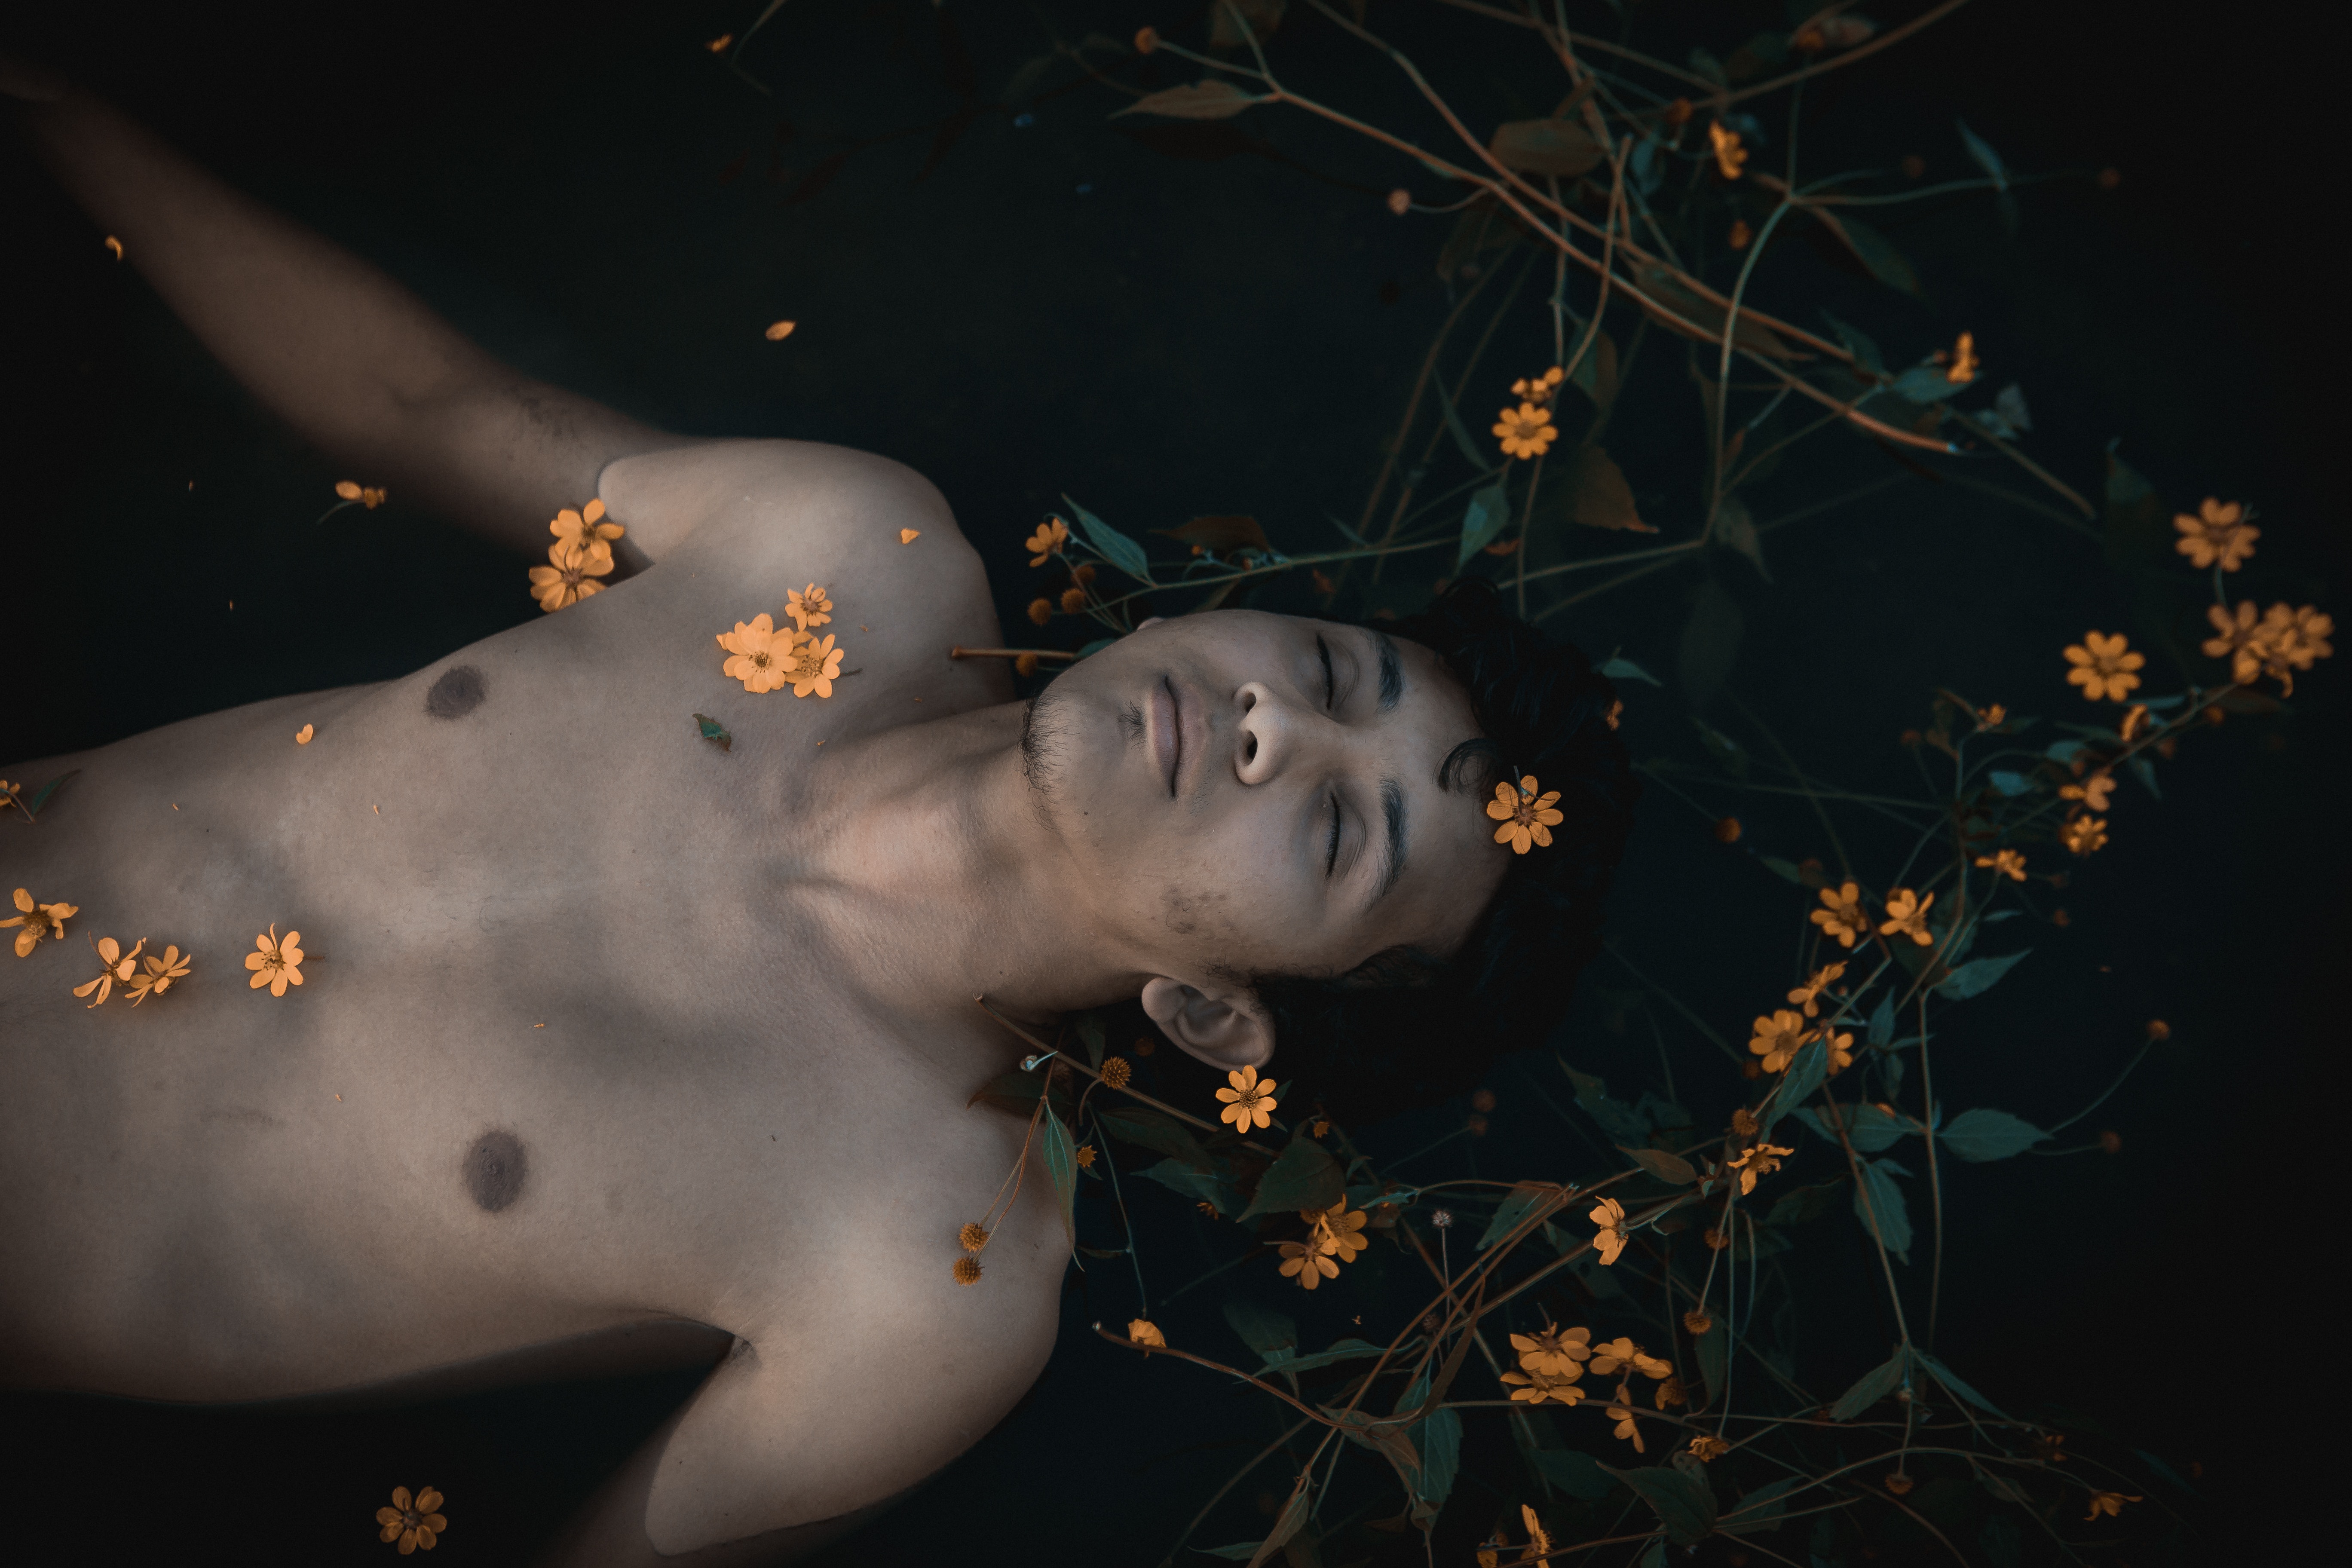 Topless Man With Orange Flowers, Adult, Model, Style, Studio, HQ Photo